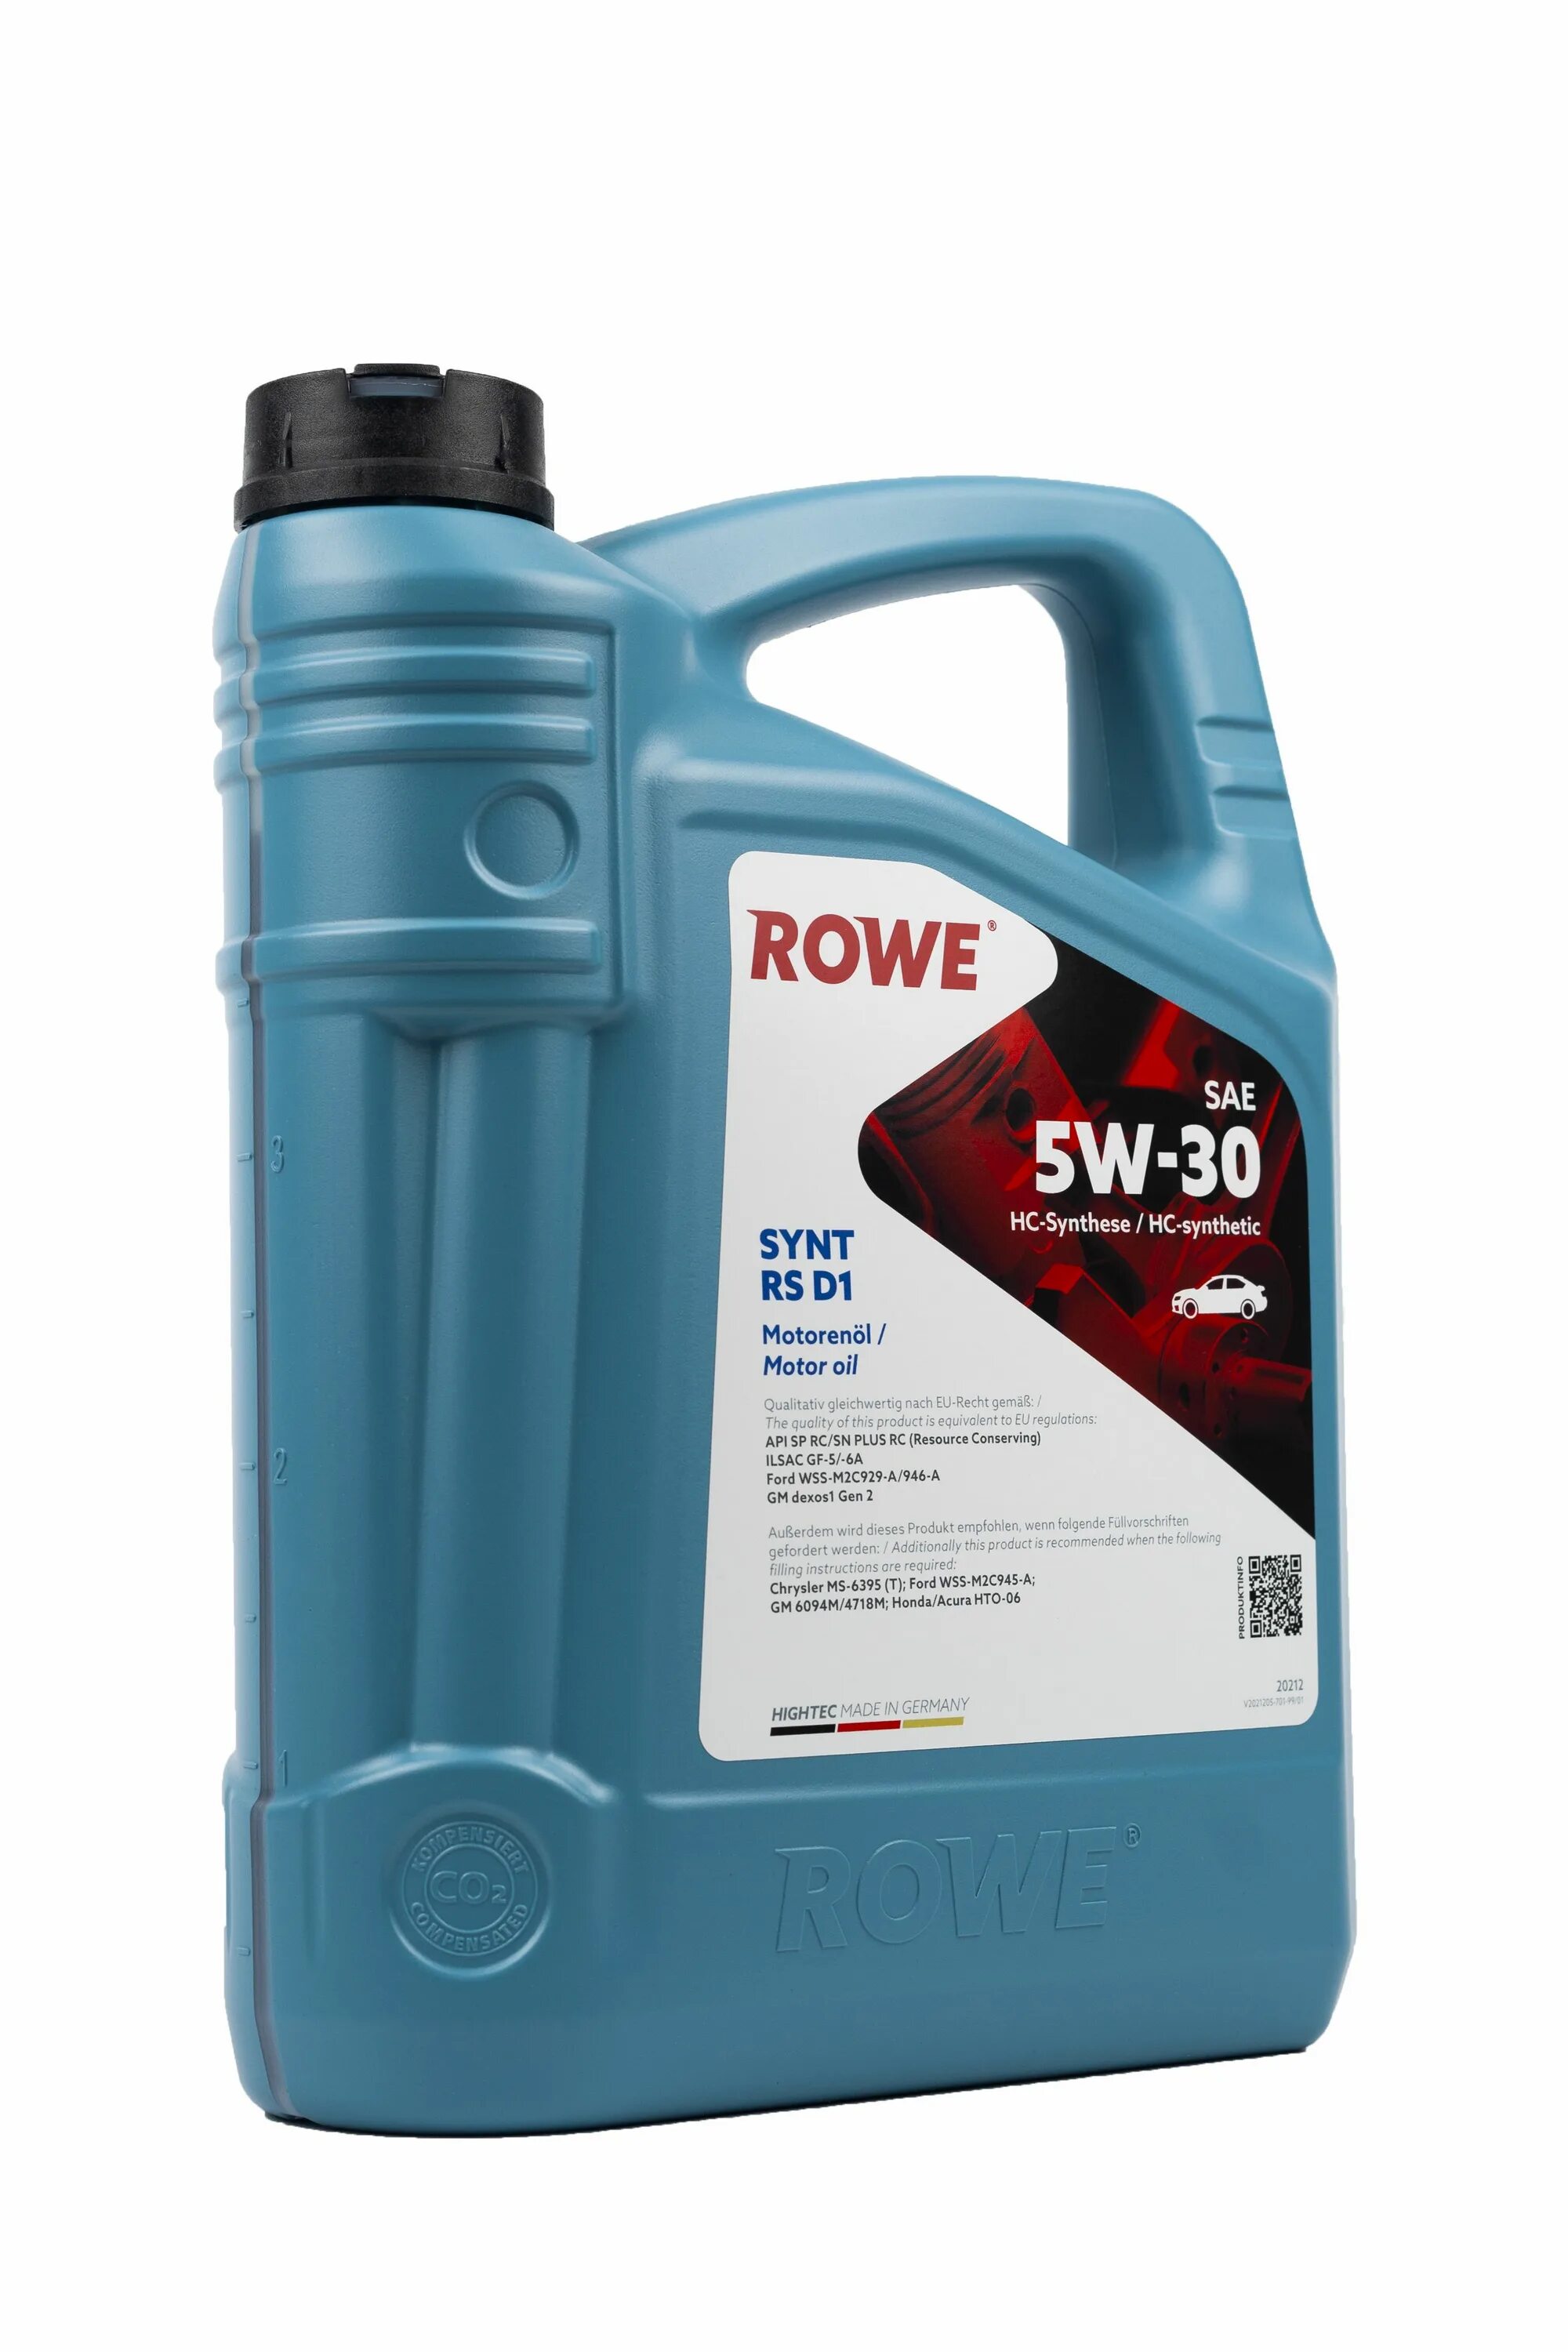 Rowe 5w30 Synt. Synt RS d1 5w-30 Rowe. Rowe 5w30 Ford. Hightec Synt RS d1 SAE 5w-30. Моторное масло rowe 5w 40